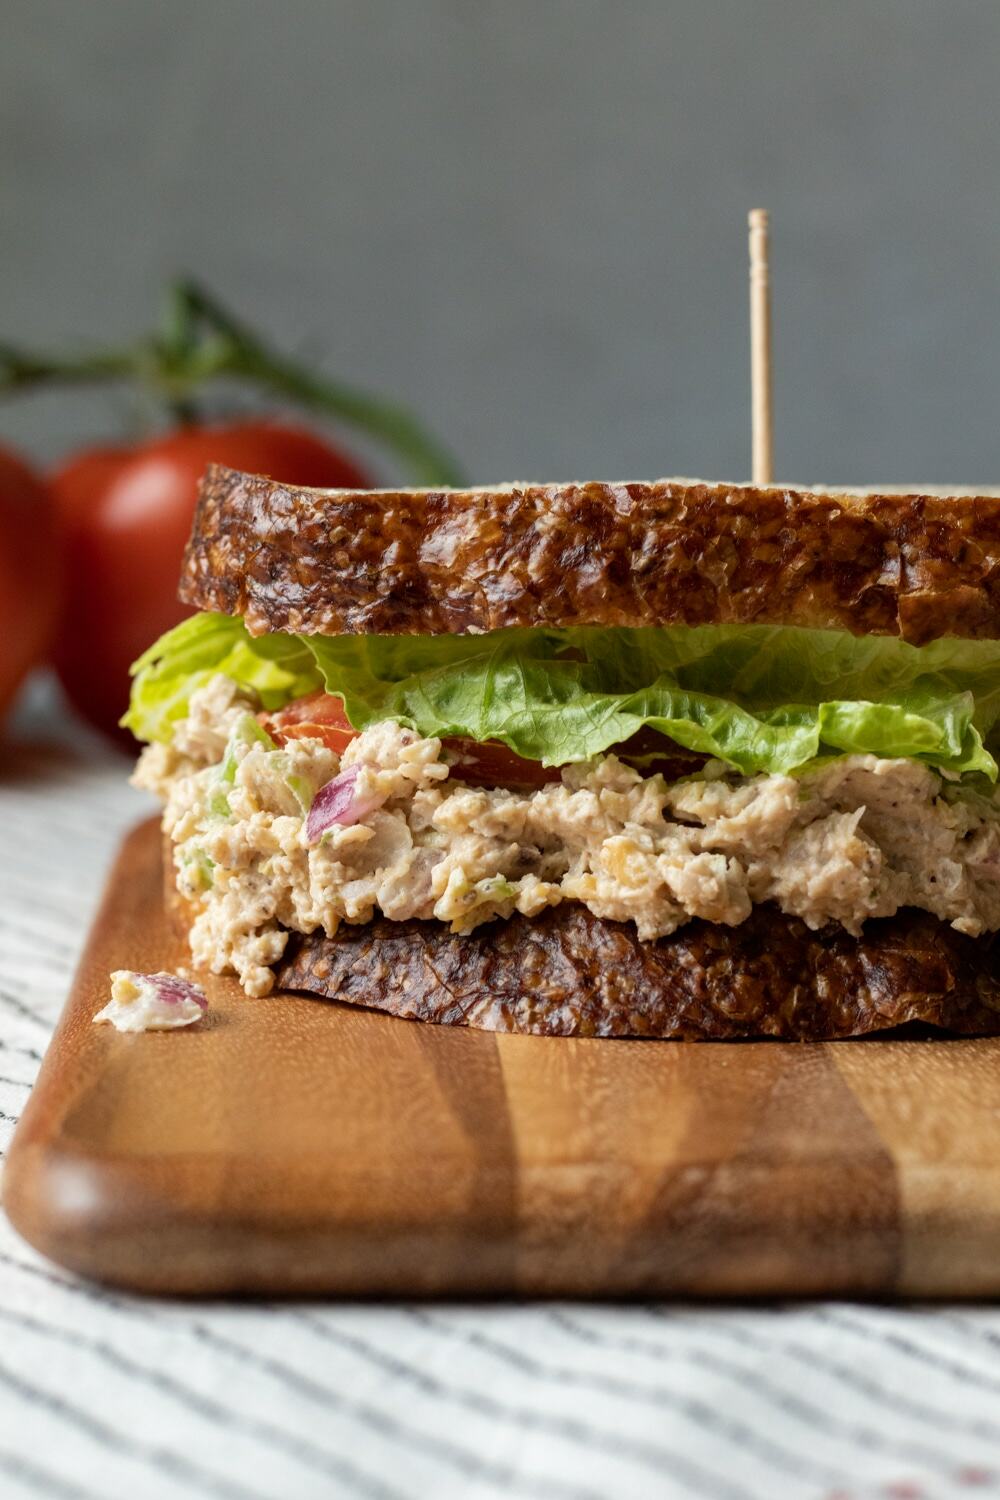 side view of vegan tuna salad sandwich, made with chickpeas and jackfruit, red onion, celery.